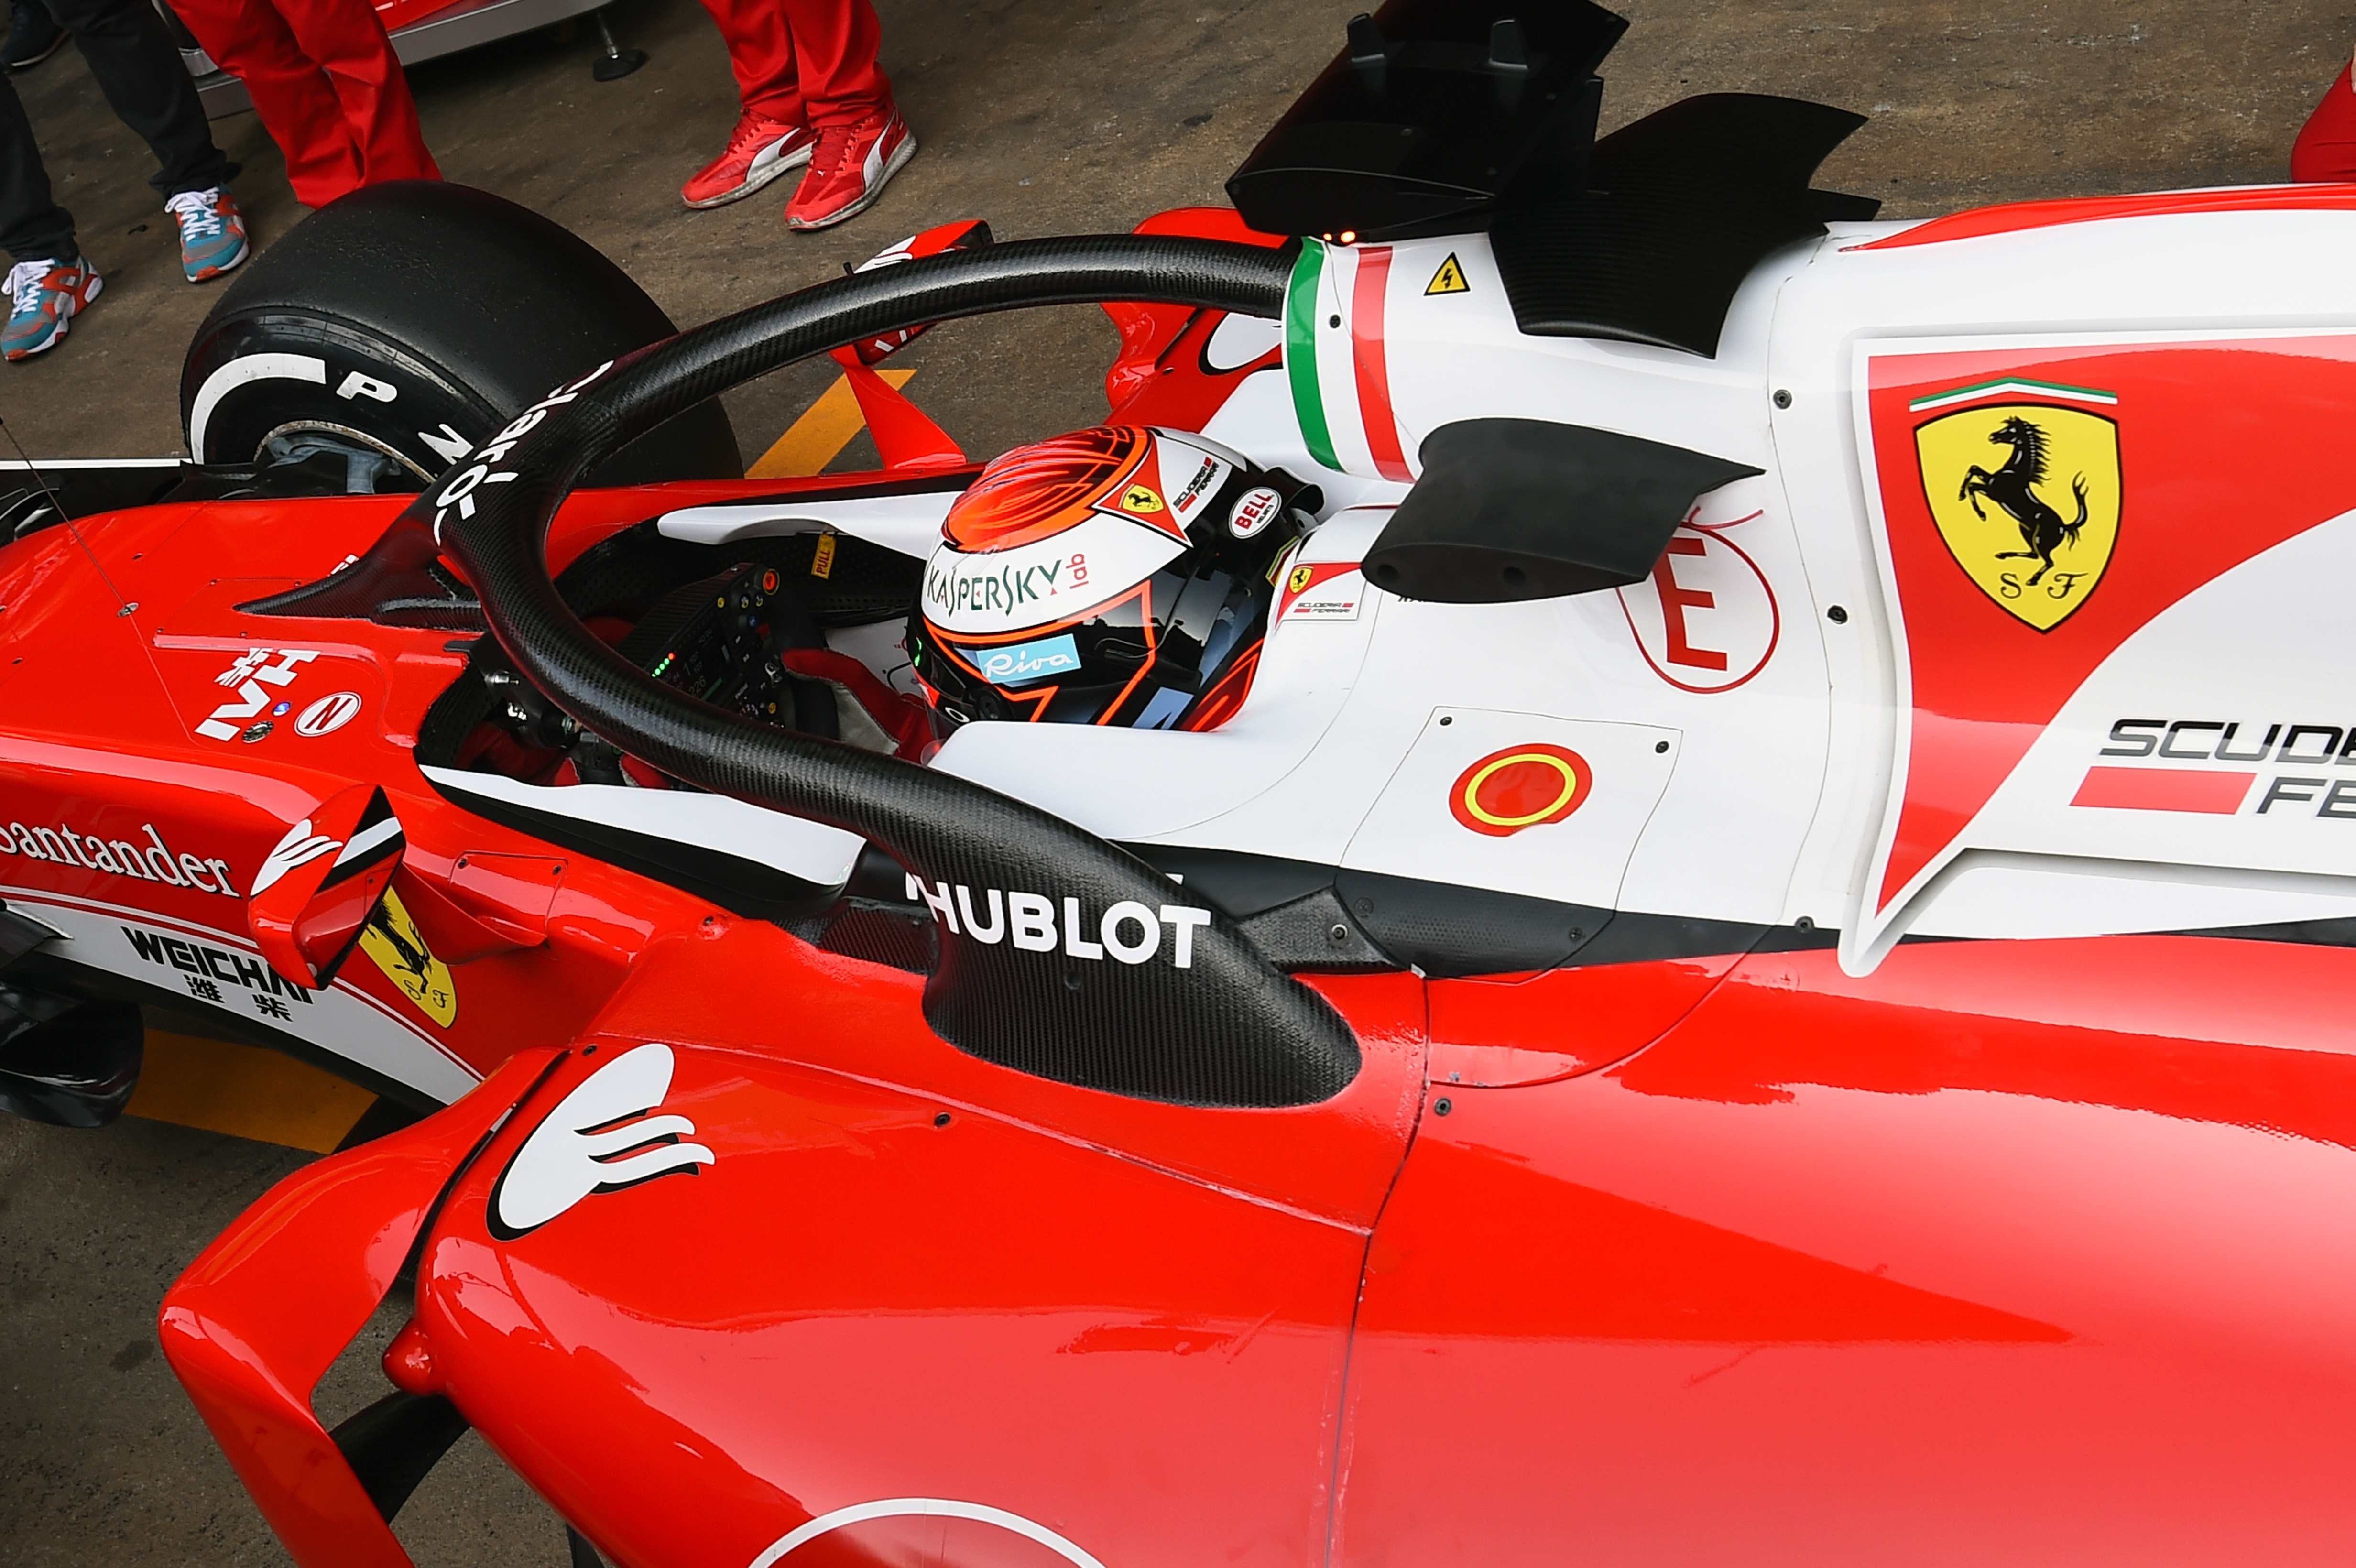 Kimi in the 2016 Ferrari with the new halo head protection